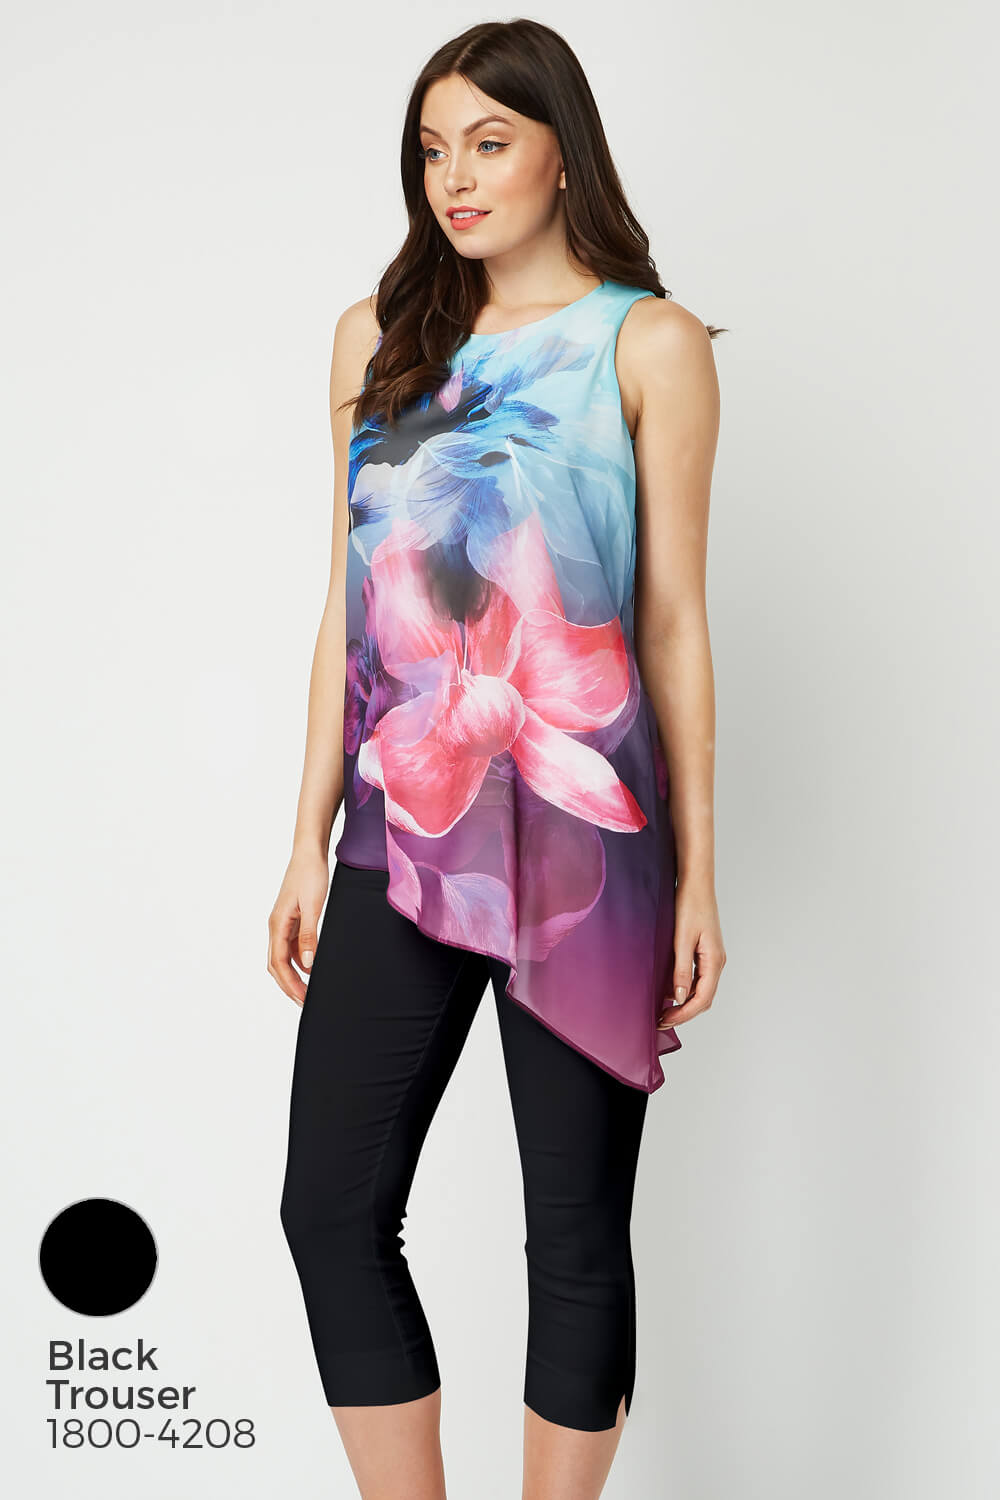 Turquoise Sleeveless Floral Print Chiffon Top, Image 8 of 8